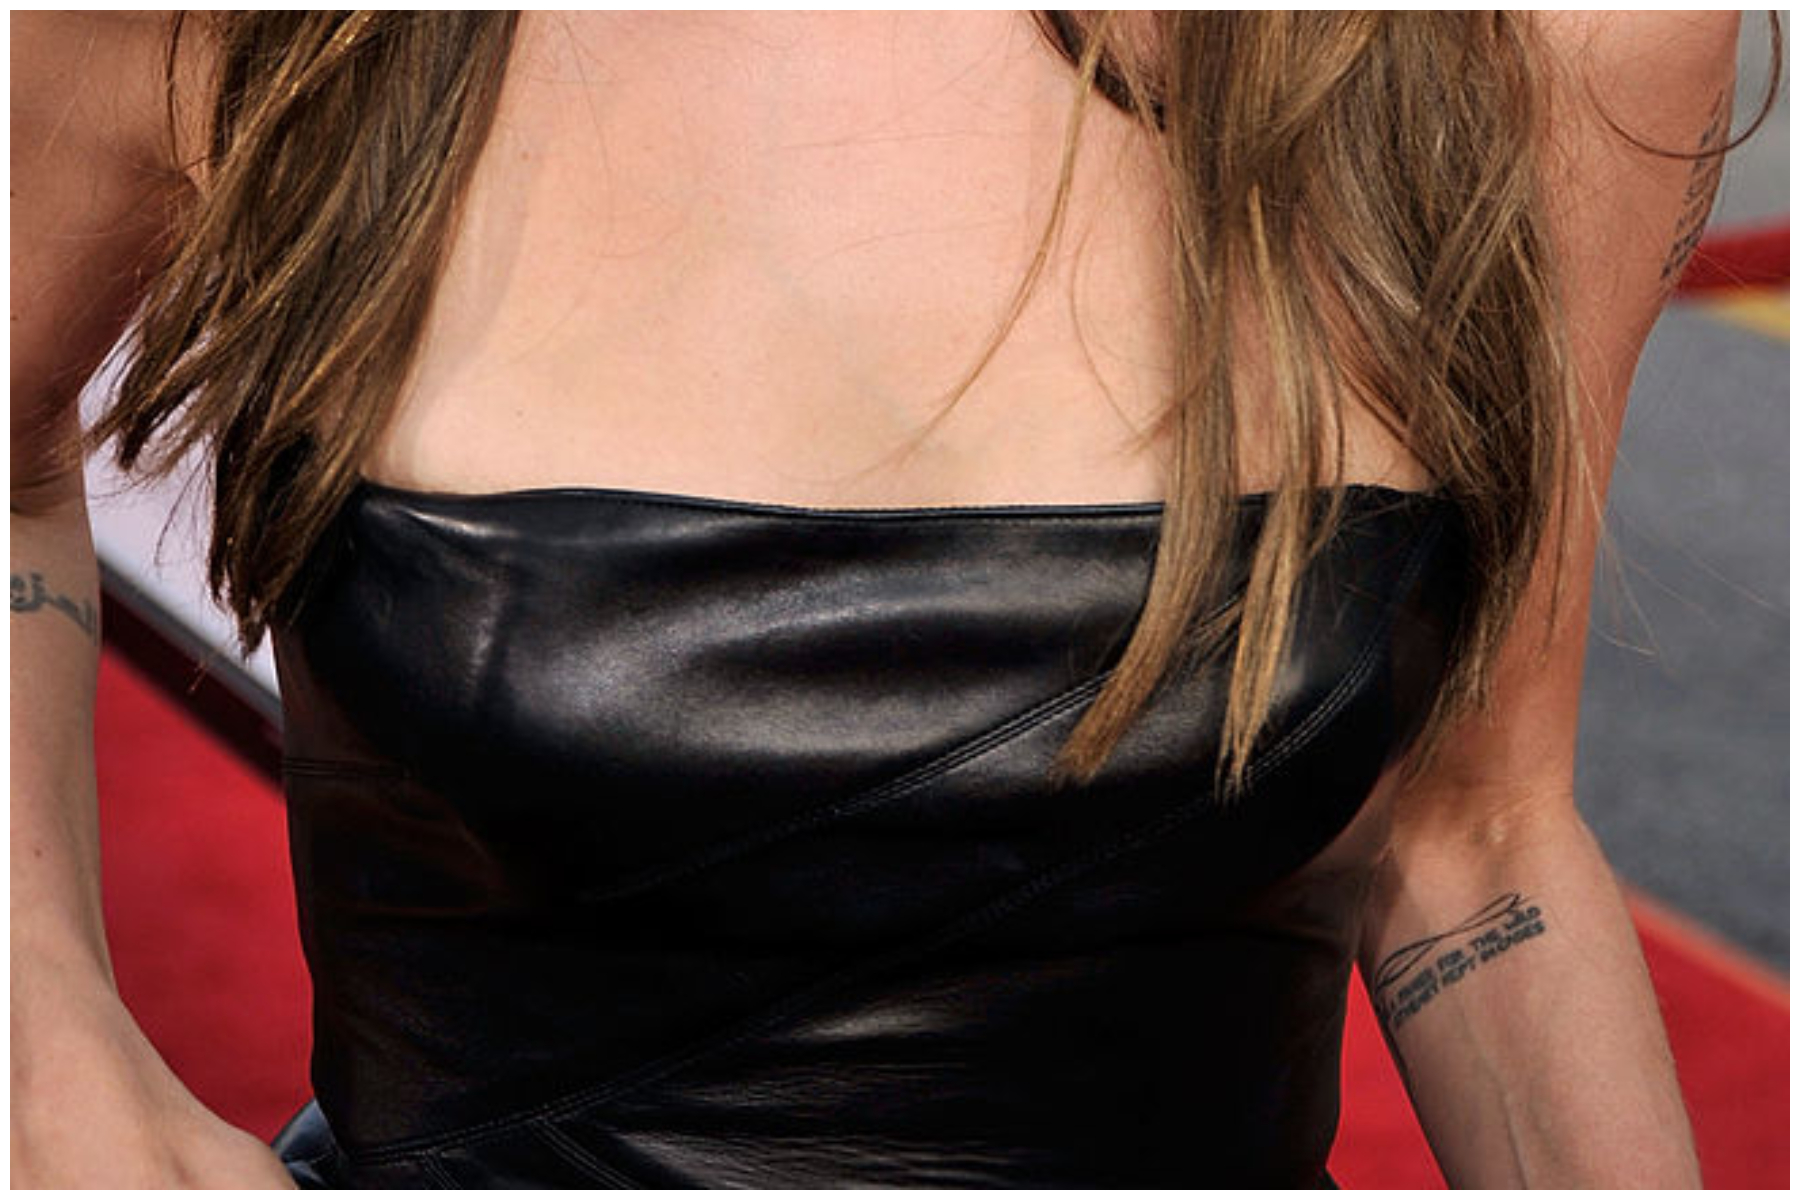 Actress Angelina Jolie's Tennessee Williams tattoo is seen as she arrives at the premiere of Weinstein Co.'s "Inglourious Basterds" held at Grauman's Chinese Theatre in Hollywood, California.